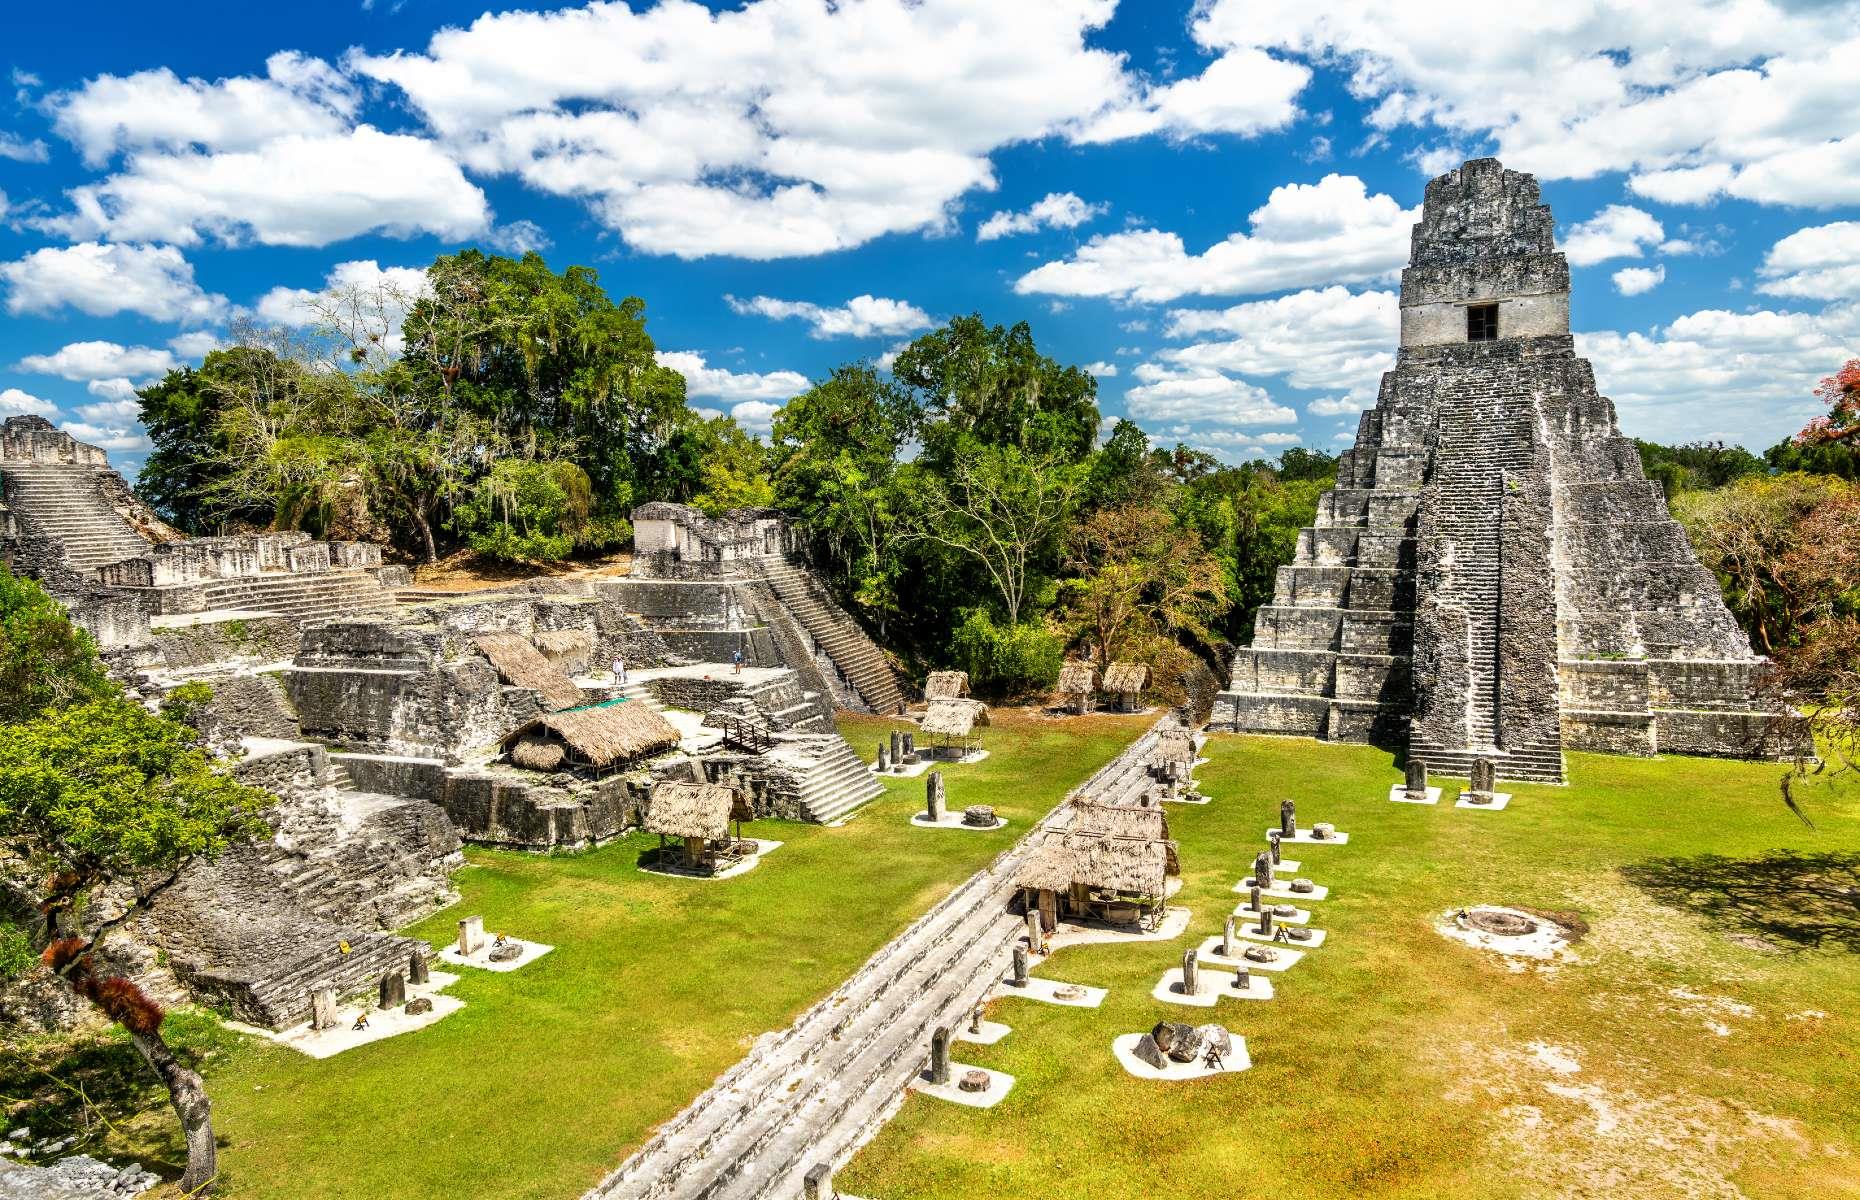 <p>When archaeologists examining laser scans of the region around the massive Mayan city of Tikal looked in more detail at an area of 'natural' hills, they made a remarkable discovery: the outline of a previously unknown neighborhood of the city. When they mapped the neighborhood in detail, they realized that the structures were close copies of the citadel at the ancient city of Teotihuacan, more than 600 miles away.</p>  <p>The findings, published in 2021, offer proof of significant cultural interaction and exchange between the two cities.</p>